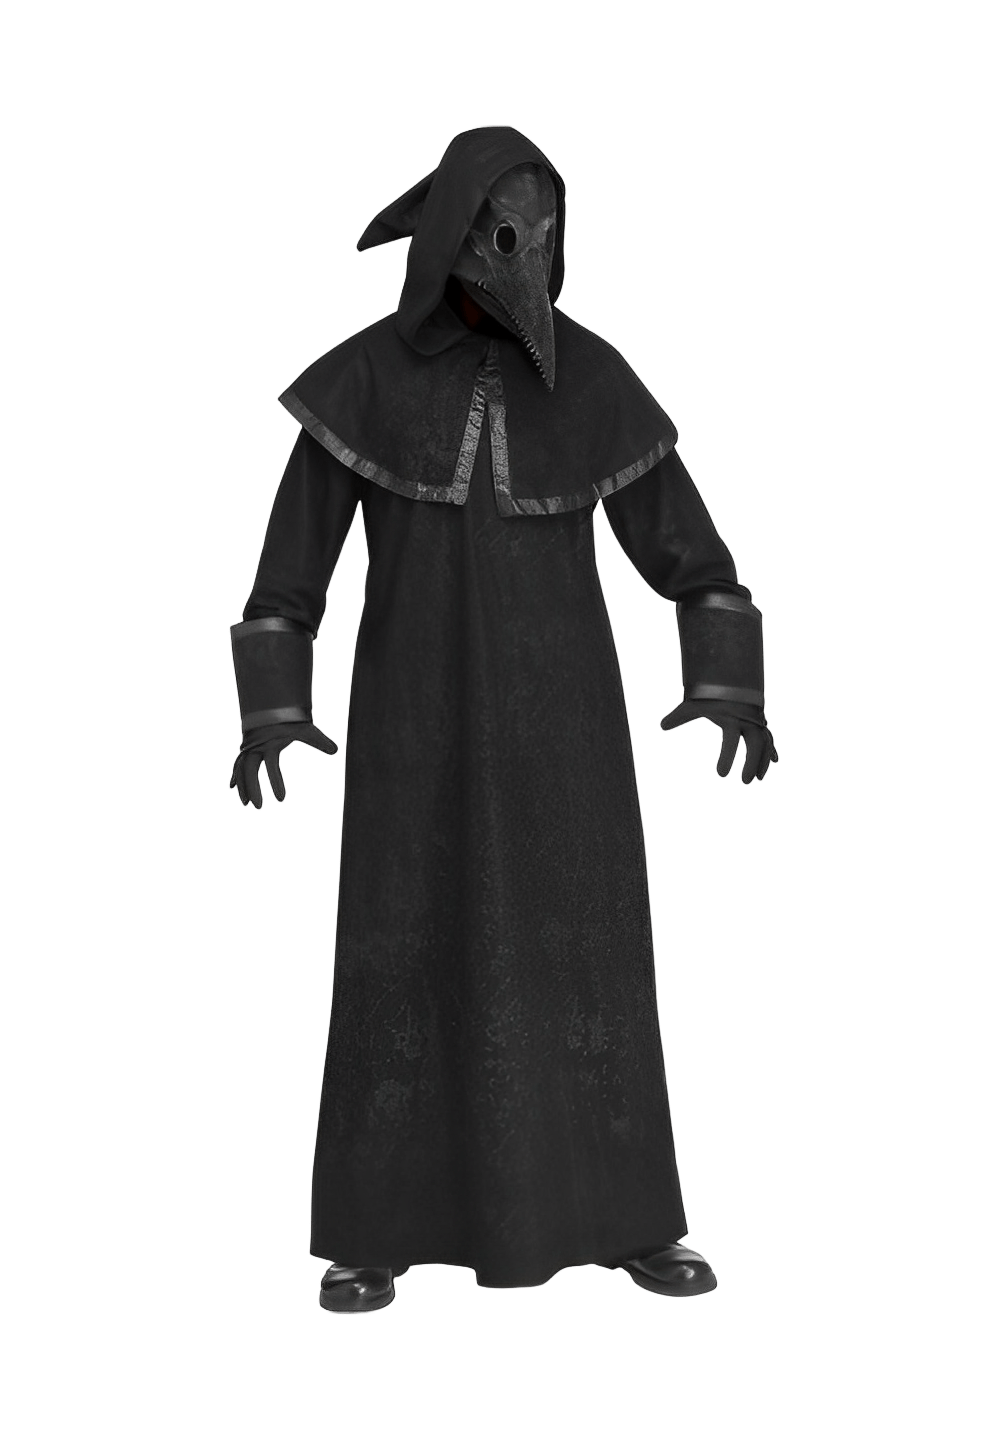 Plague Doctor Adult Costume